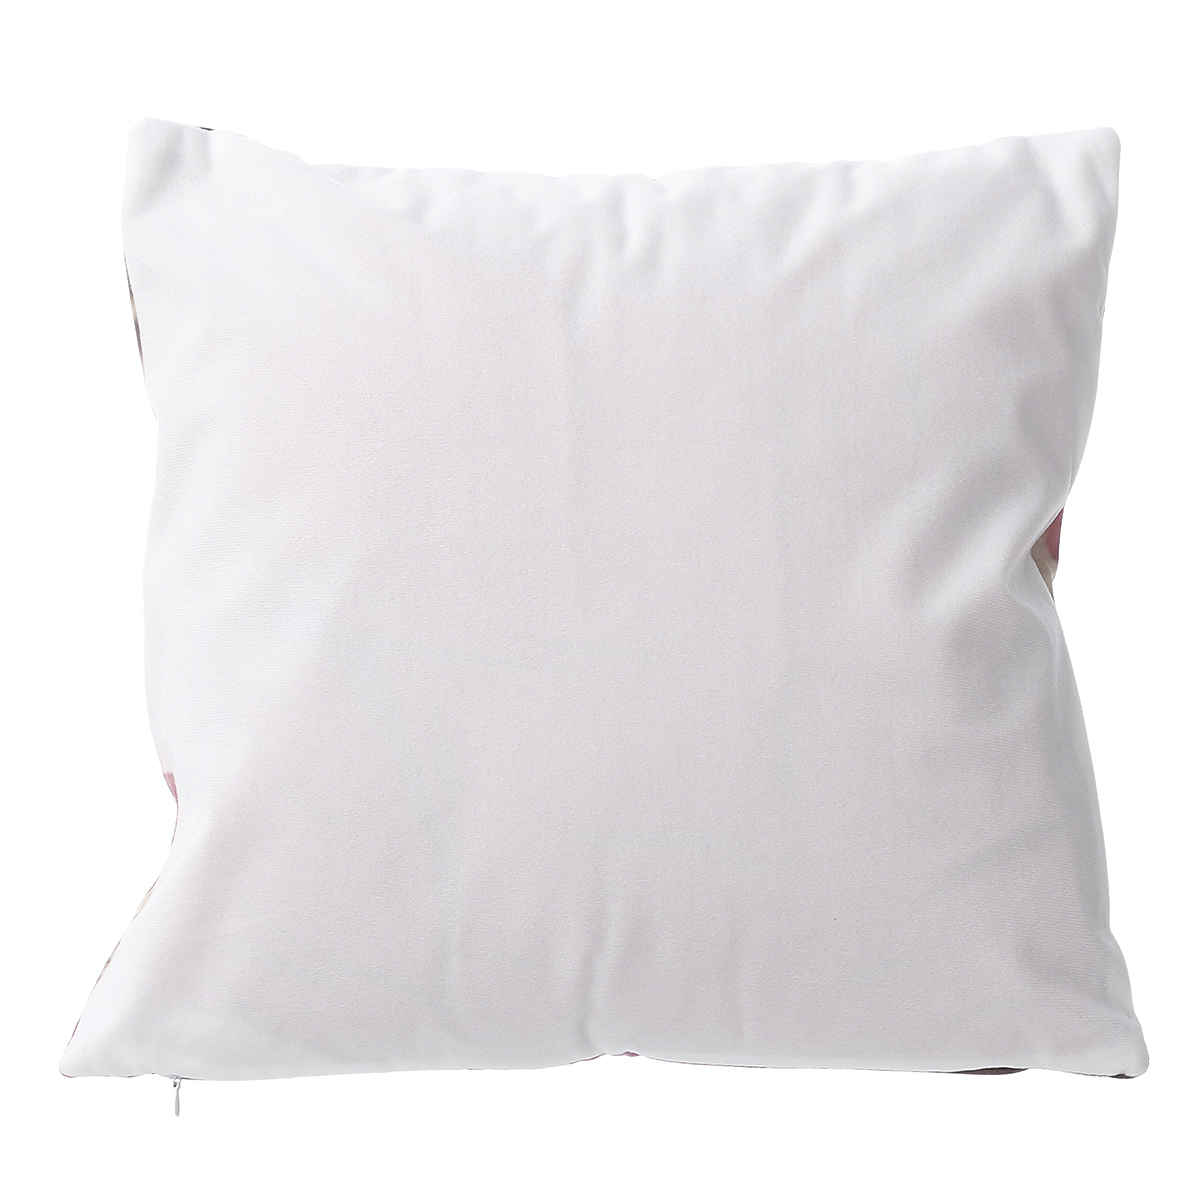 Polyester-Throw-Pillow-Cover-Cushion-Seat-Sofa-Case-Home-Bedroom-Decorations-1518225-7